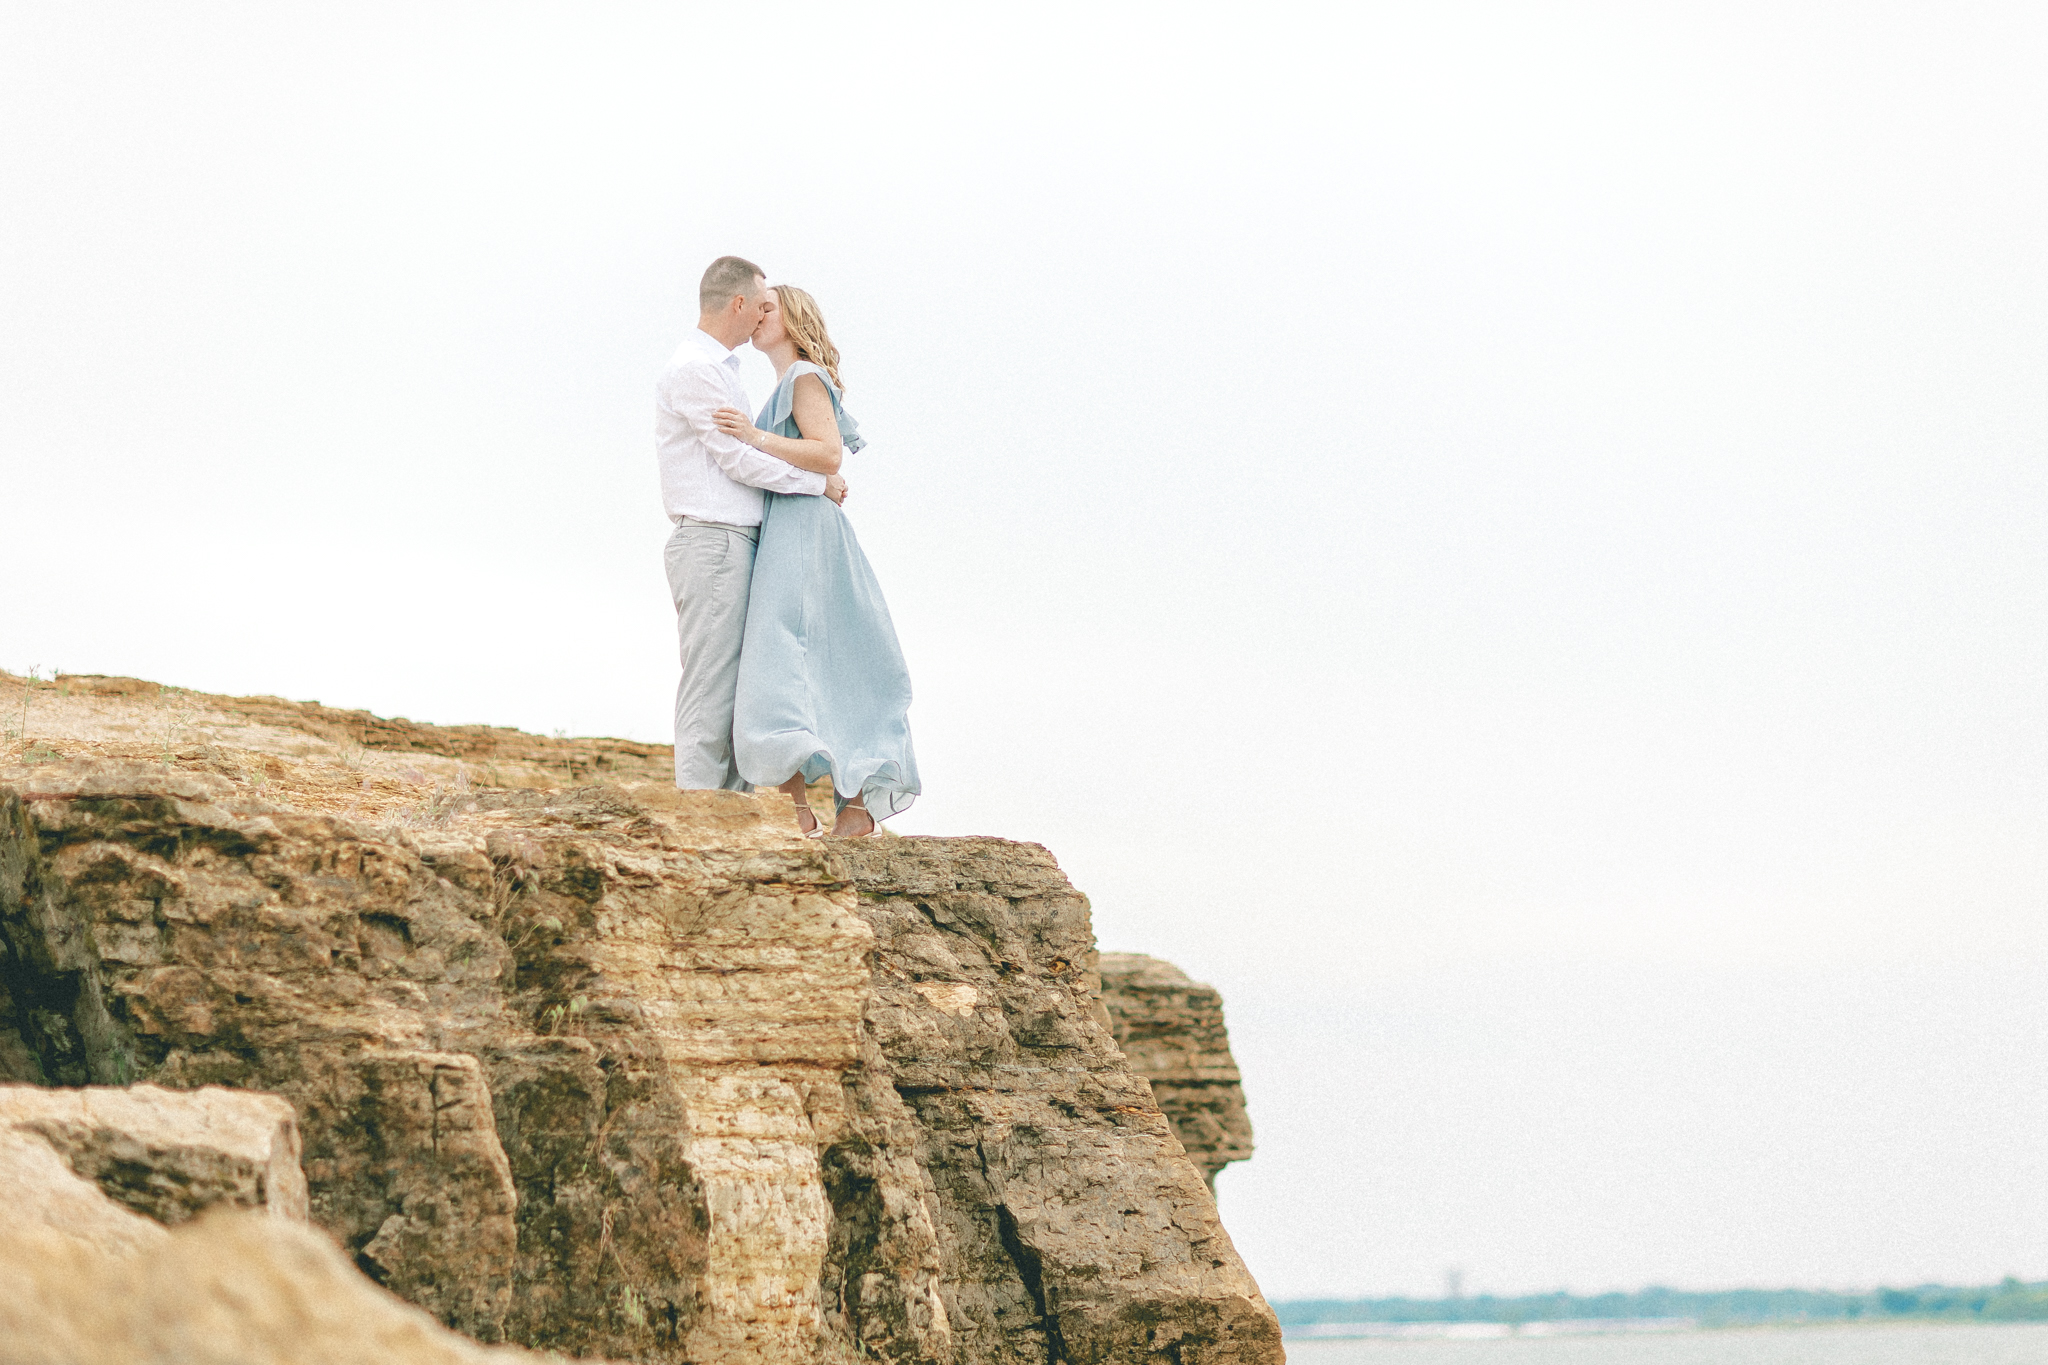 fort-worth-lake-engagement-session-texas-wedding-photographer-hayley-moore-photography